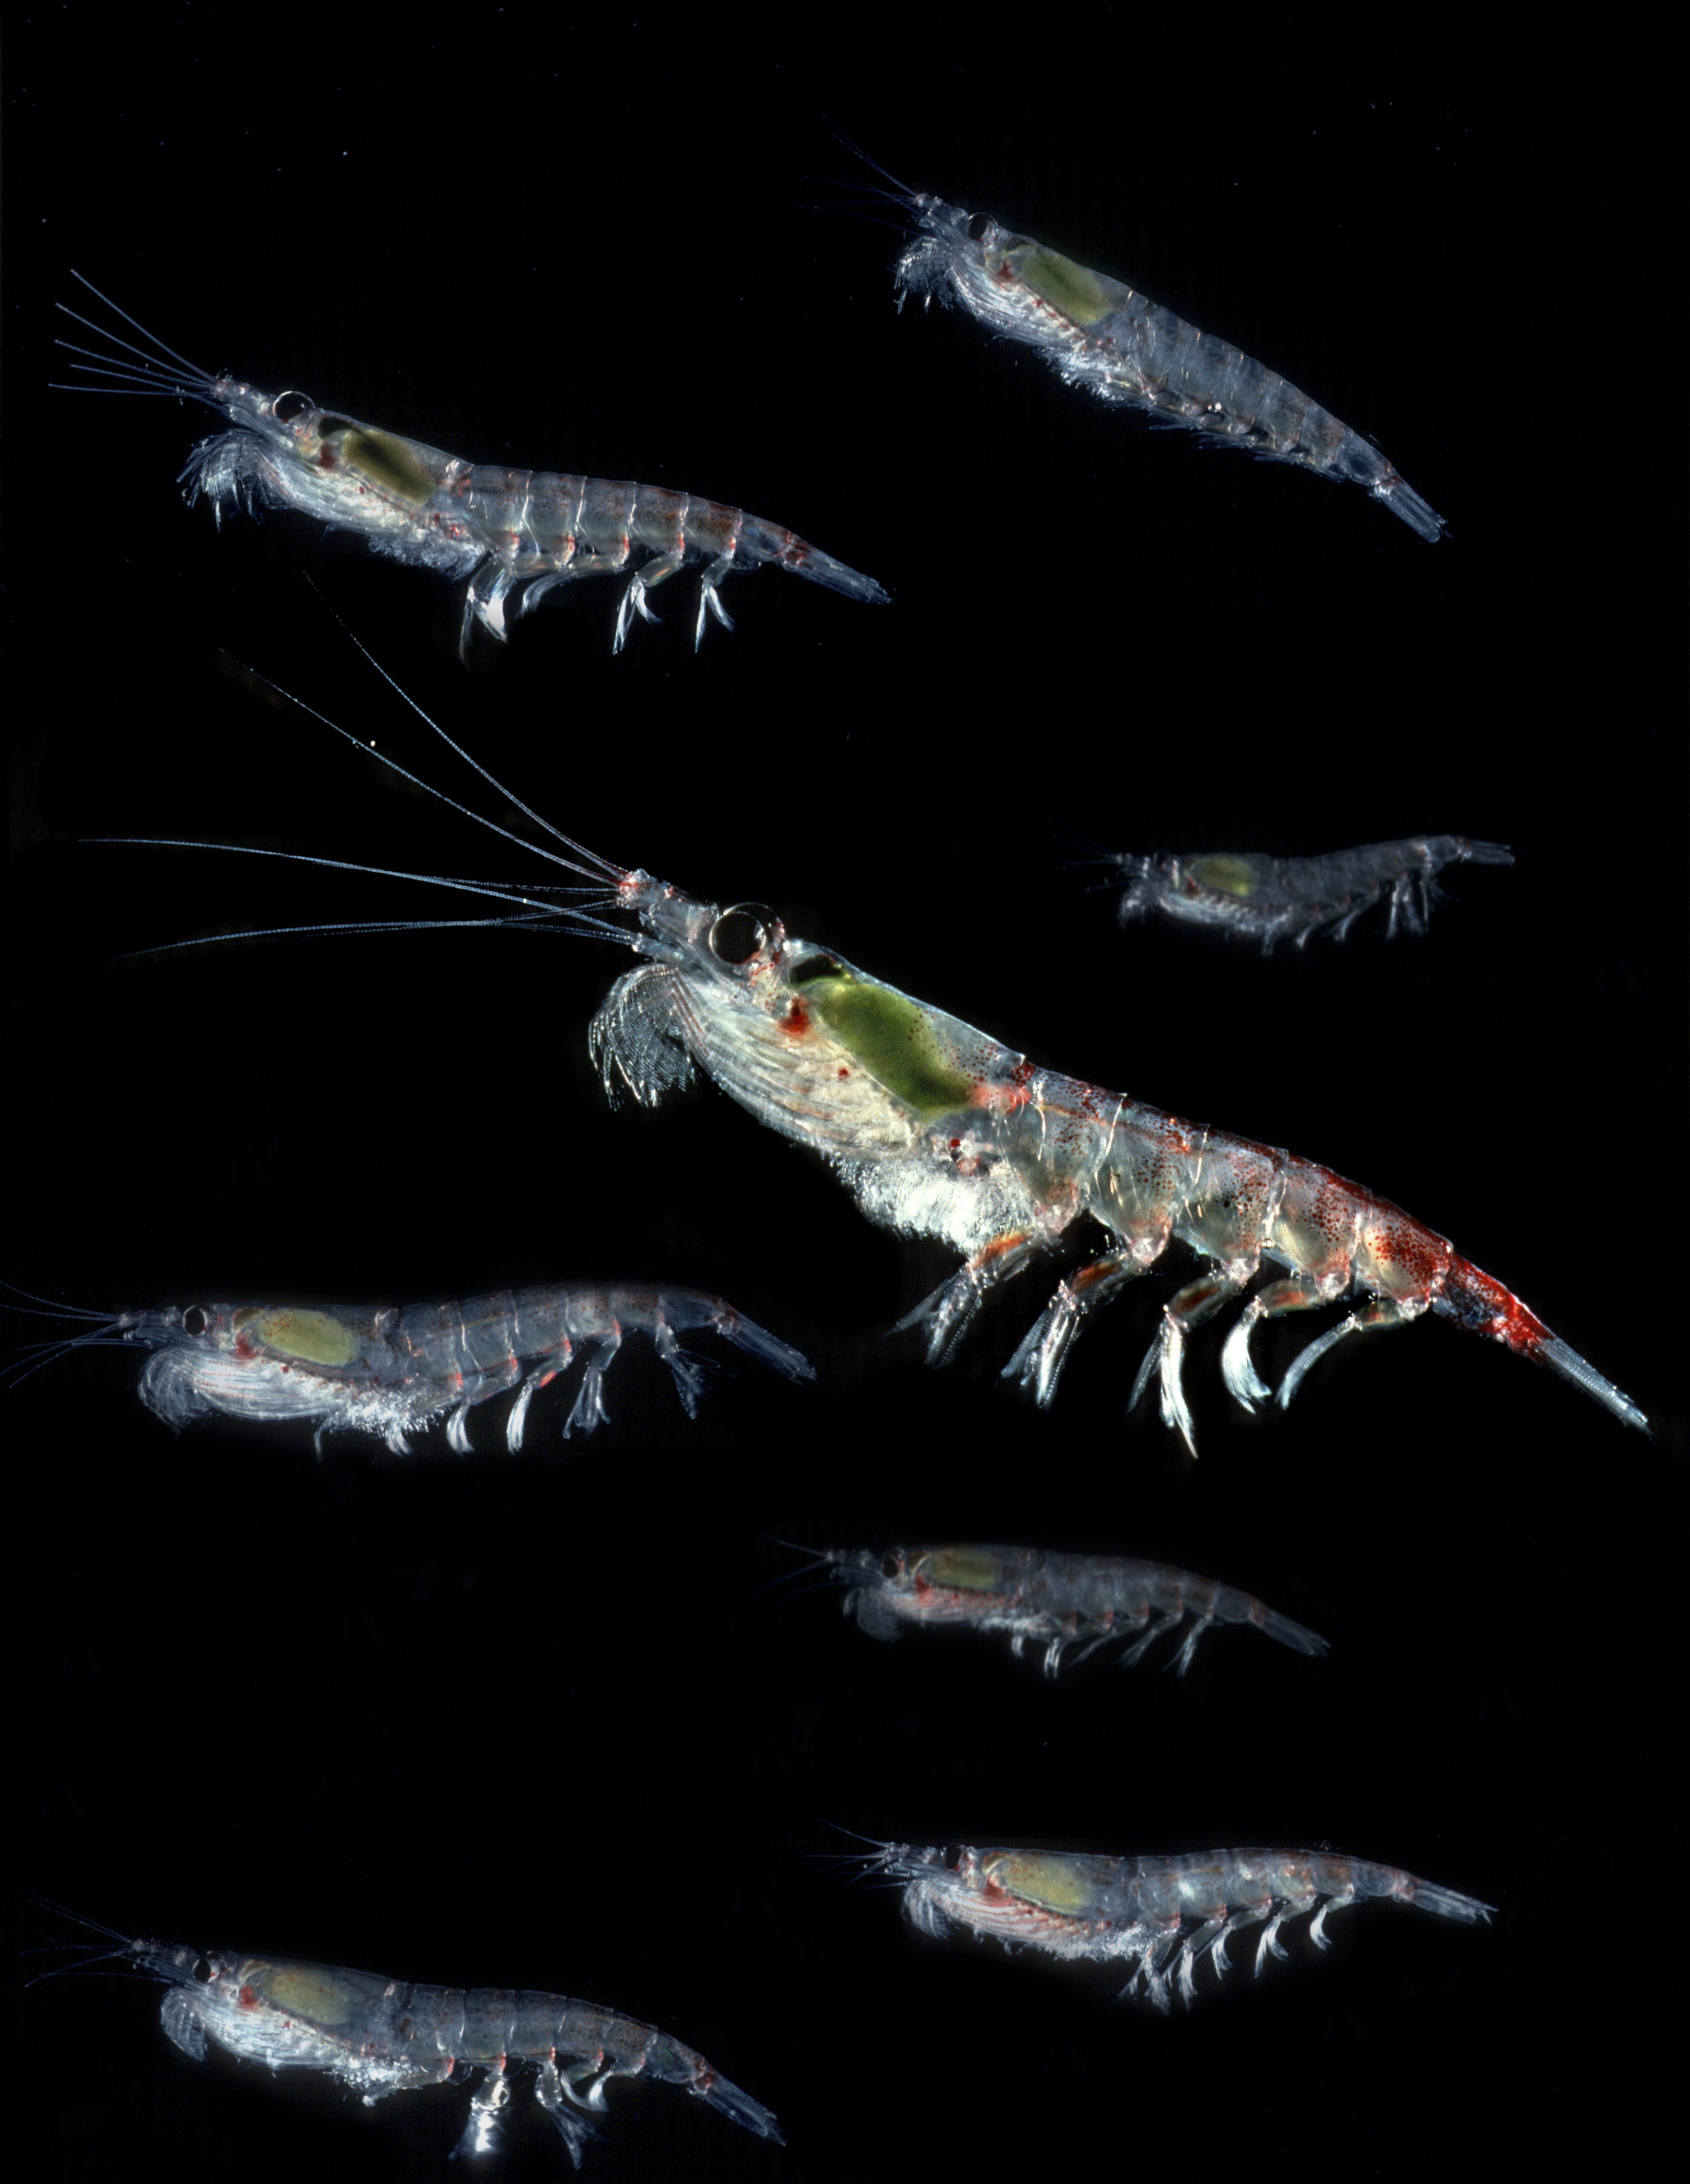 Eight krill lit up against a black background